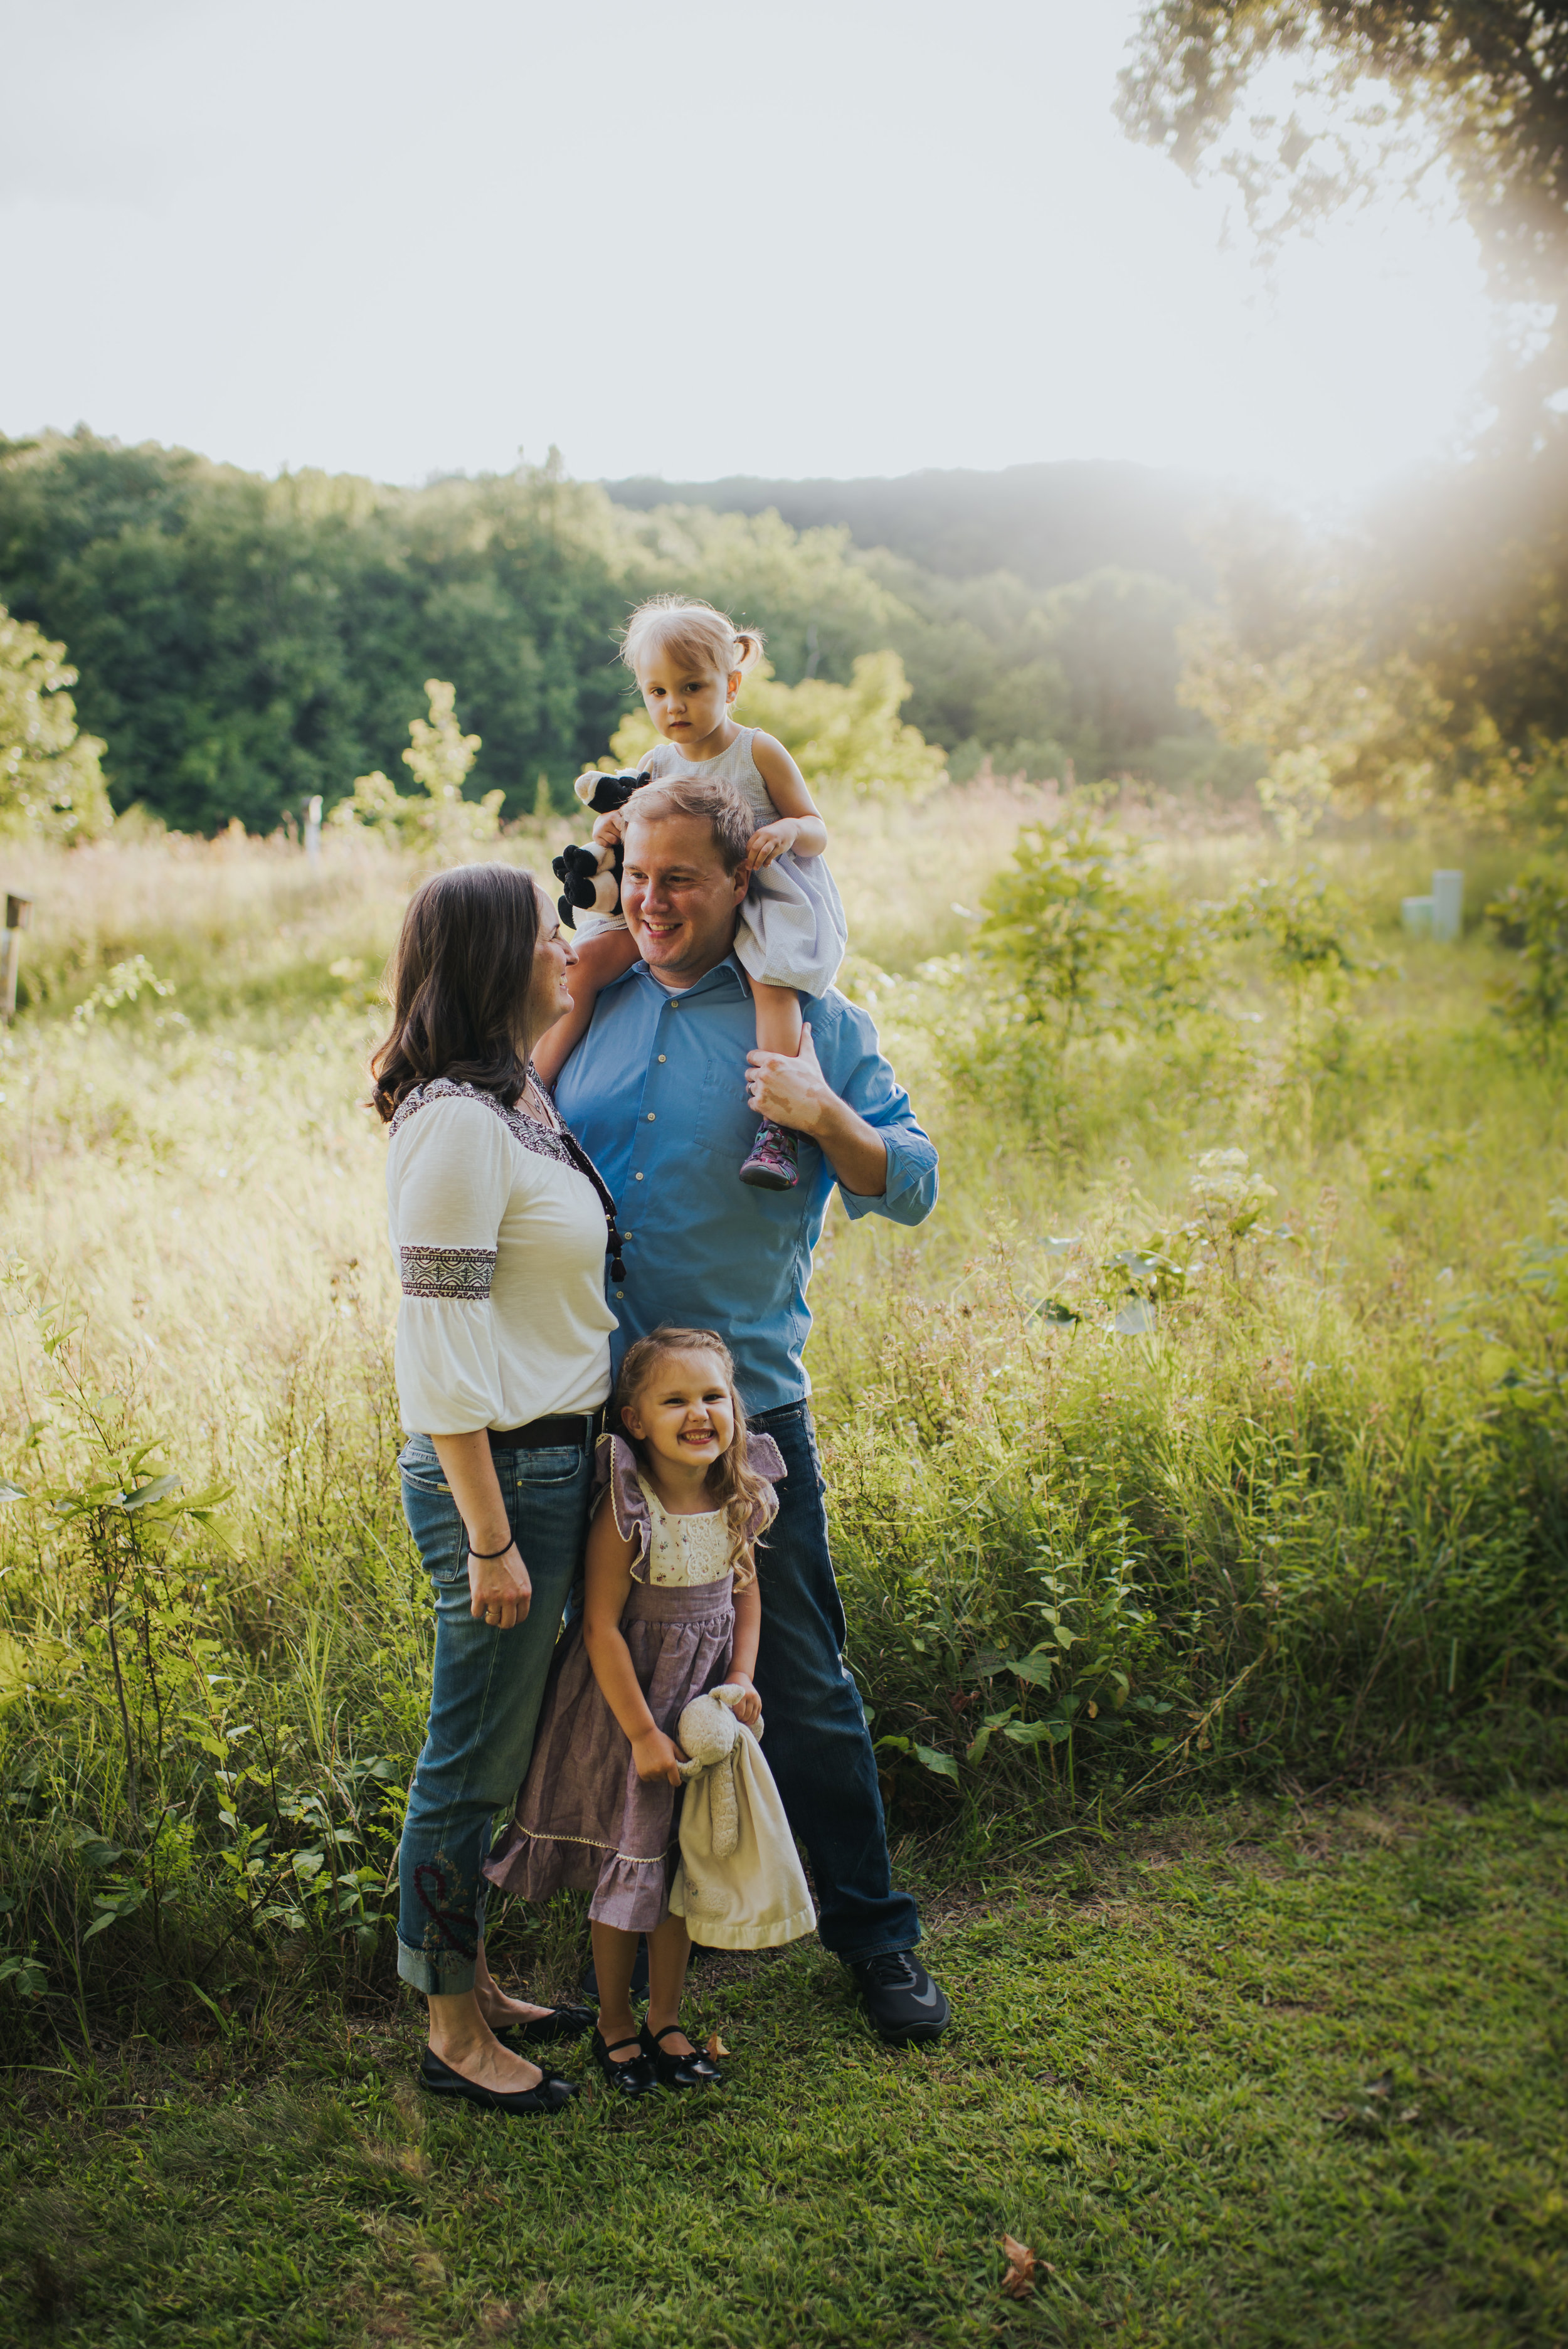 Family in Park Southbury, Ct Kendra Conroy Photography